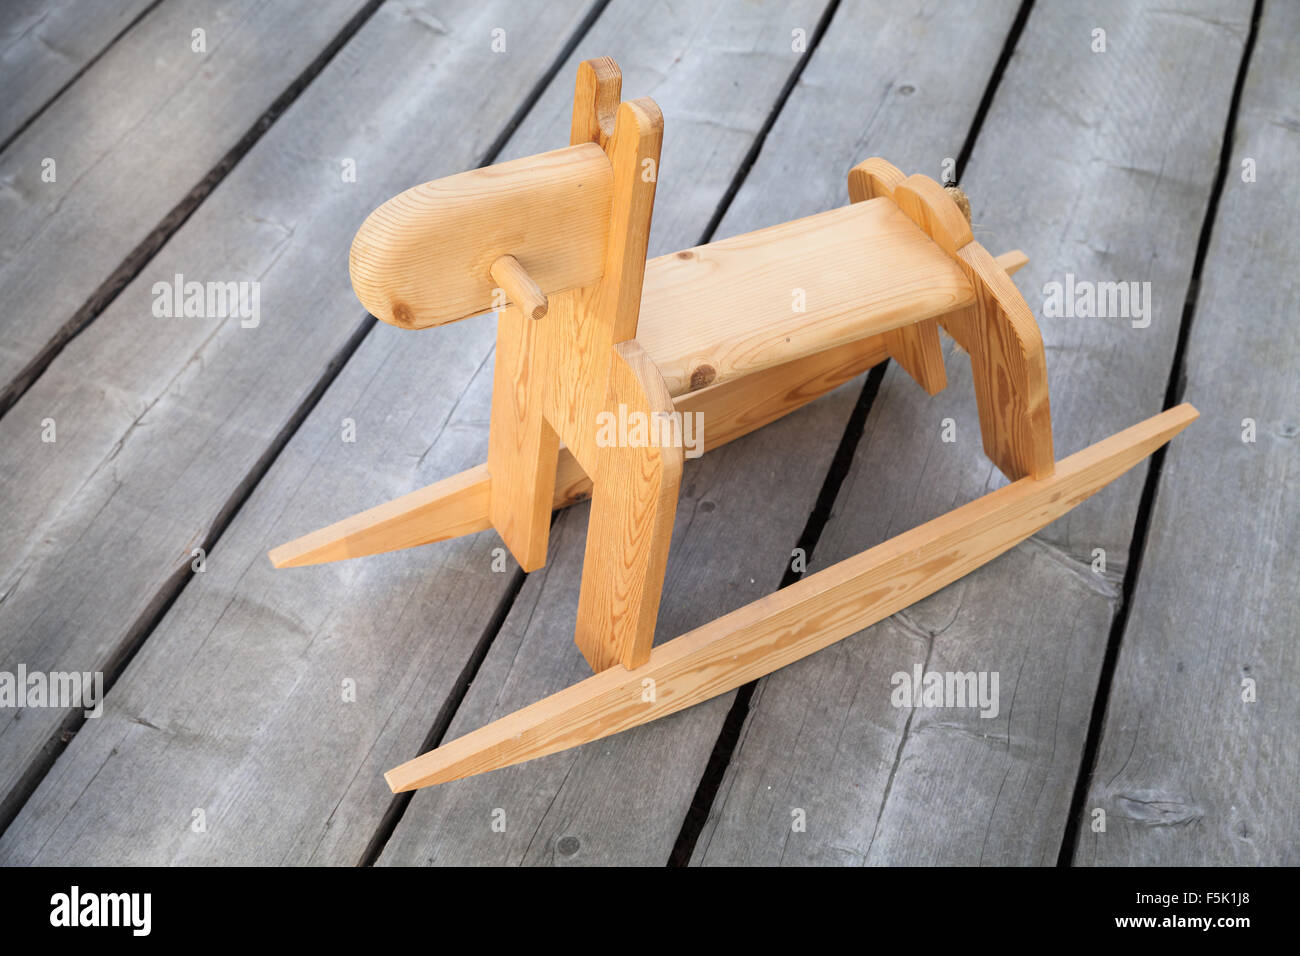 Traditional Scandinavian wooden rocking horse toy Stock Photo